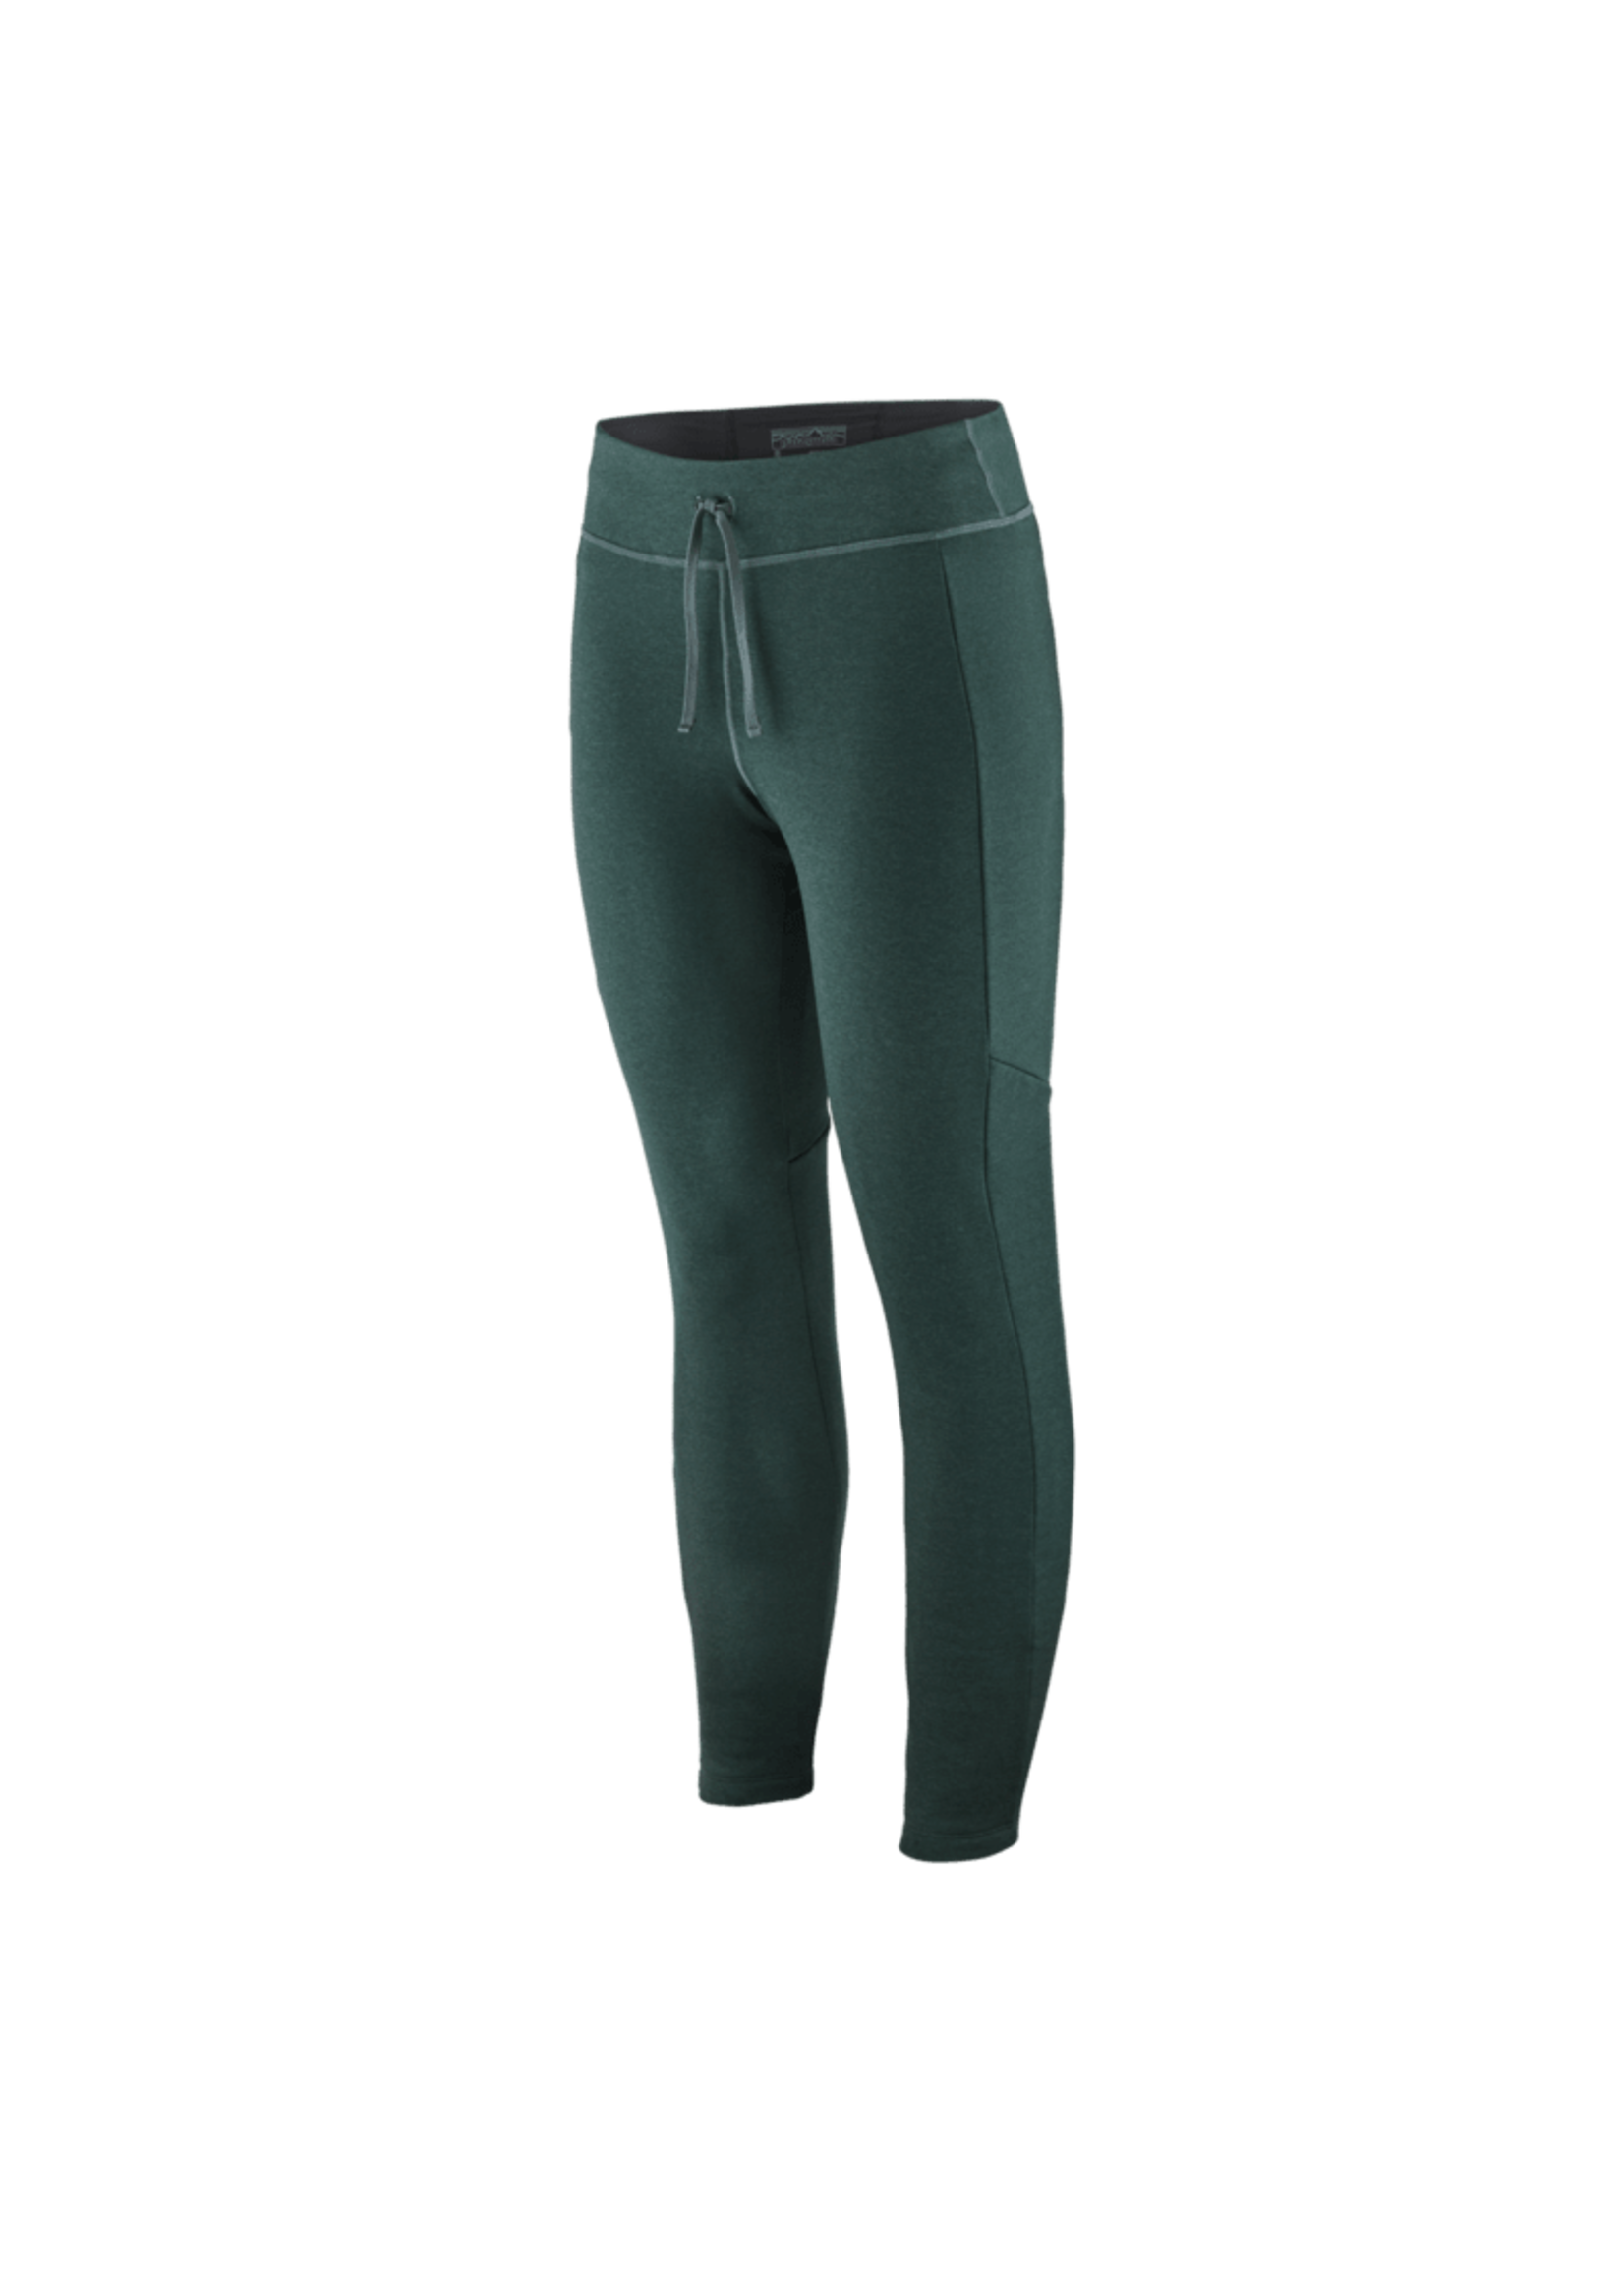 Patagonia Women's R1 Daily Bottoms - Green